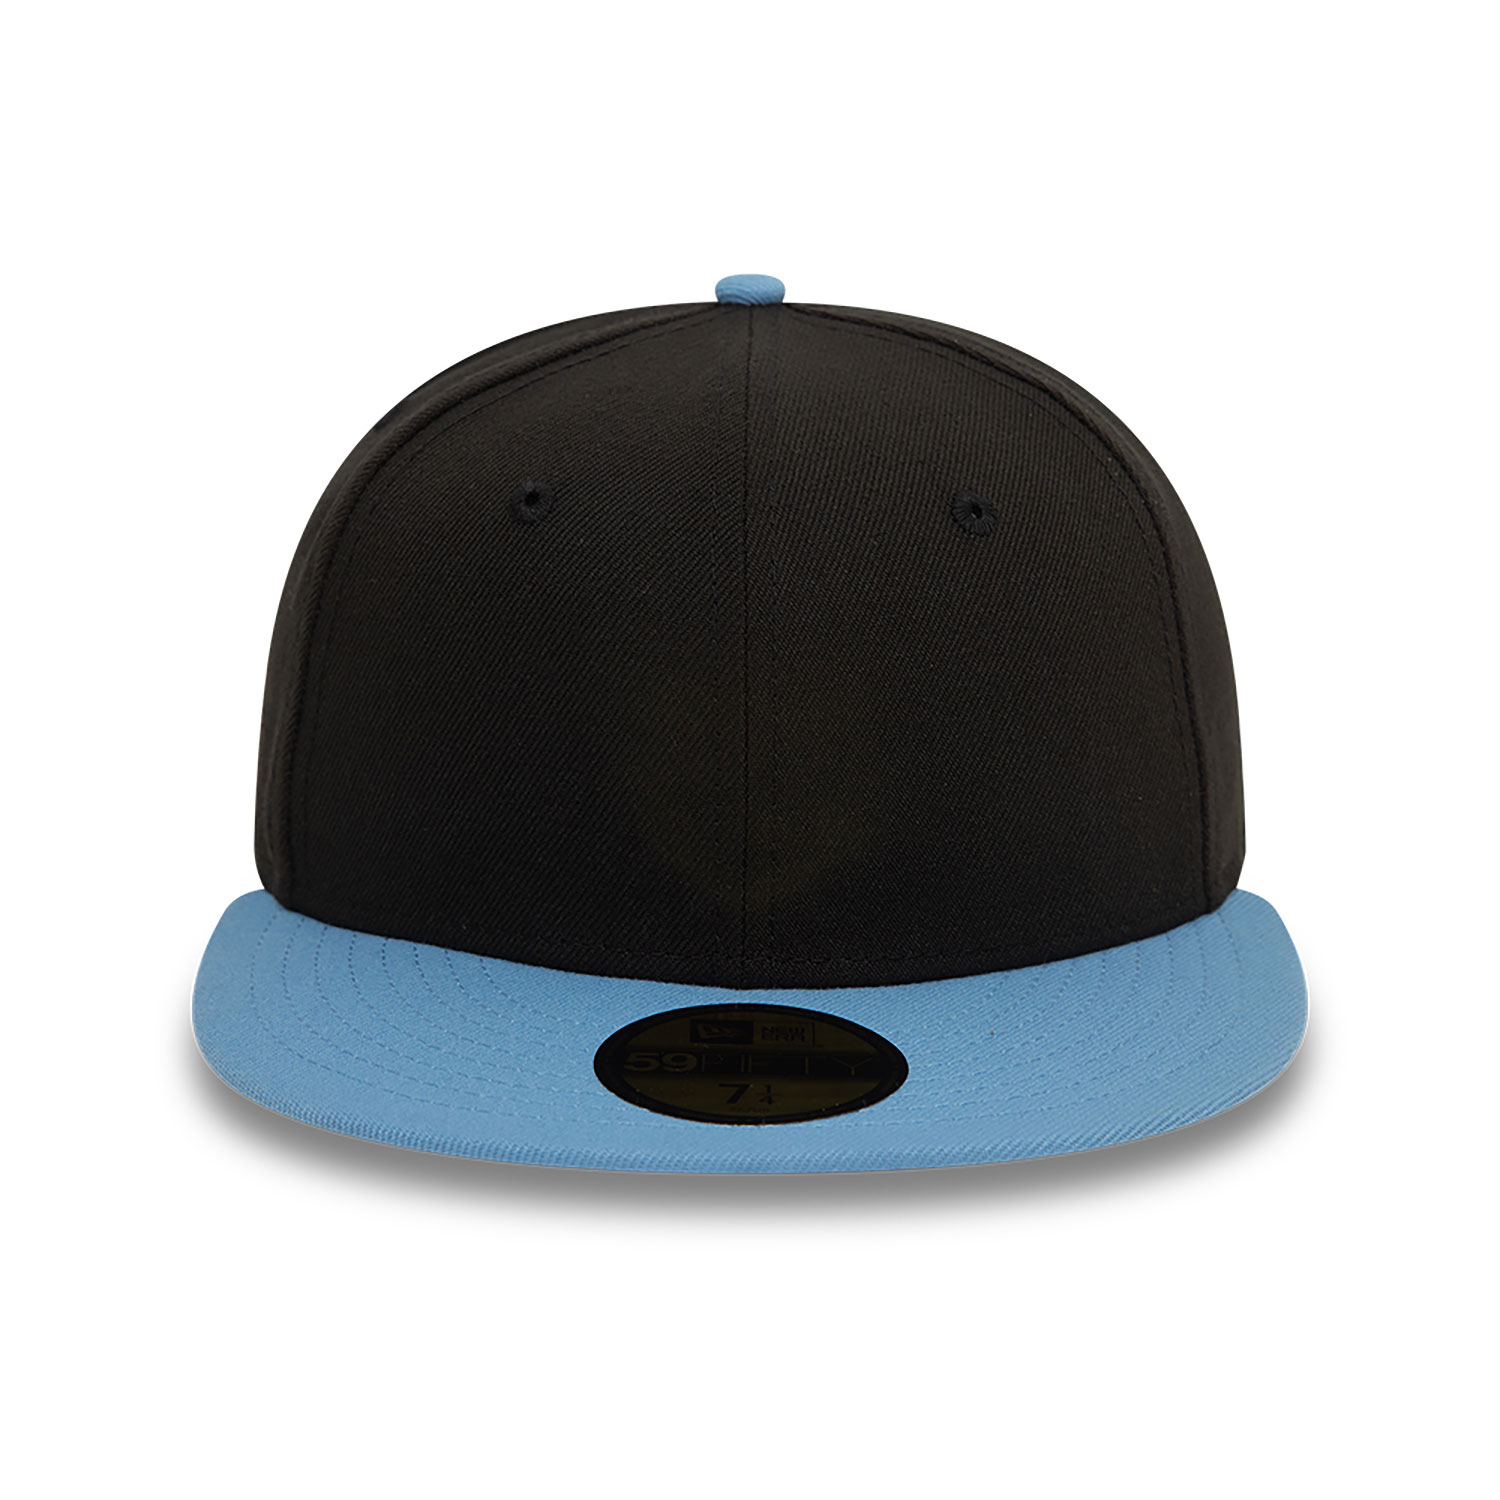 New Era Contrast Crown Black and Blue 59FIFTY Fitted Cap